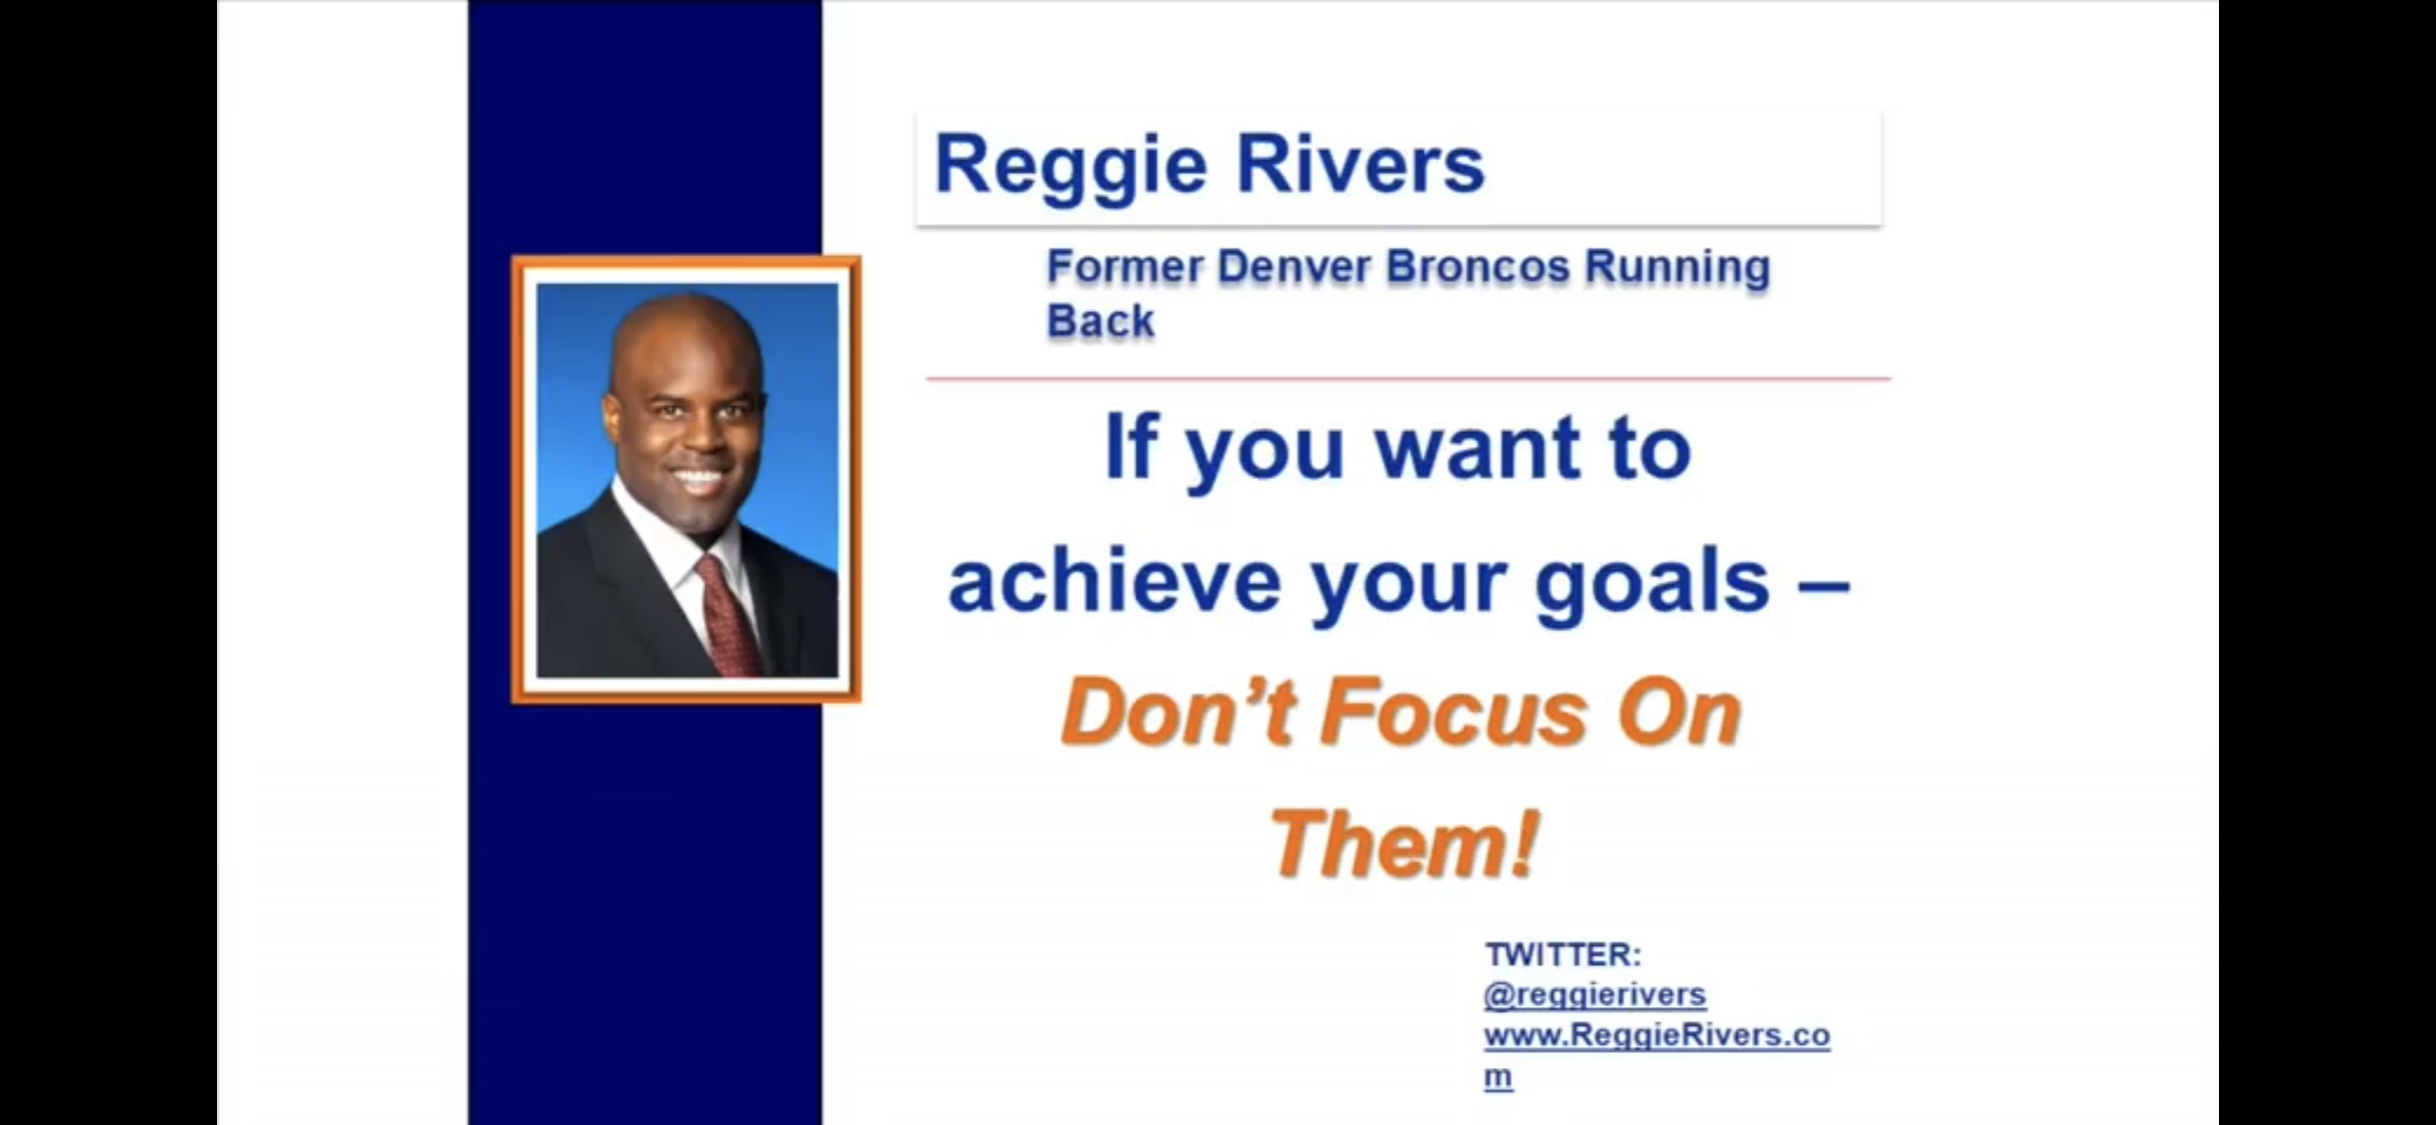 TED Reggie Rivers If you want to achieve your goals Don"t focus on Them